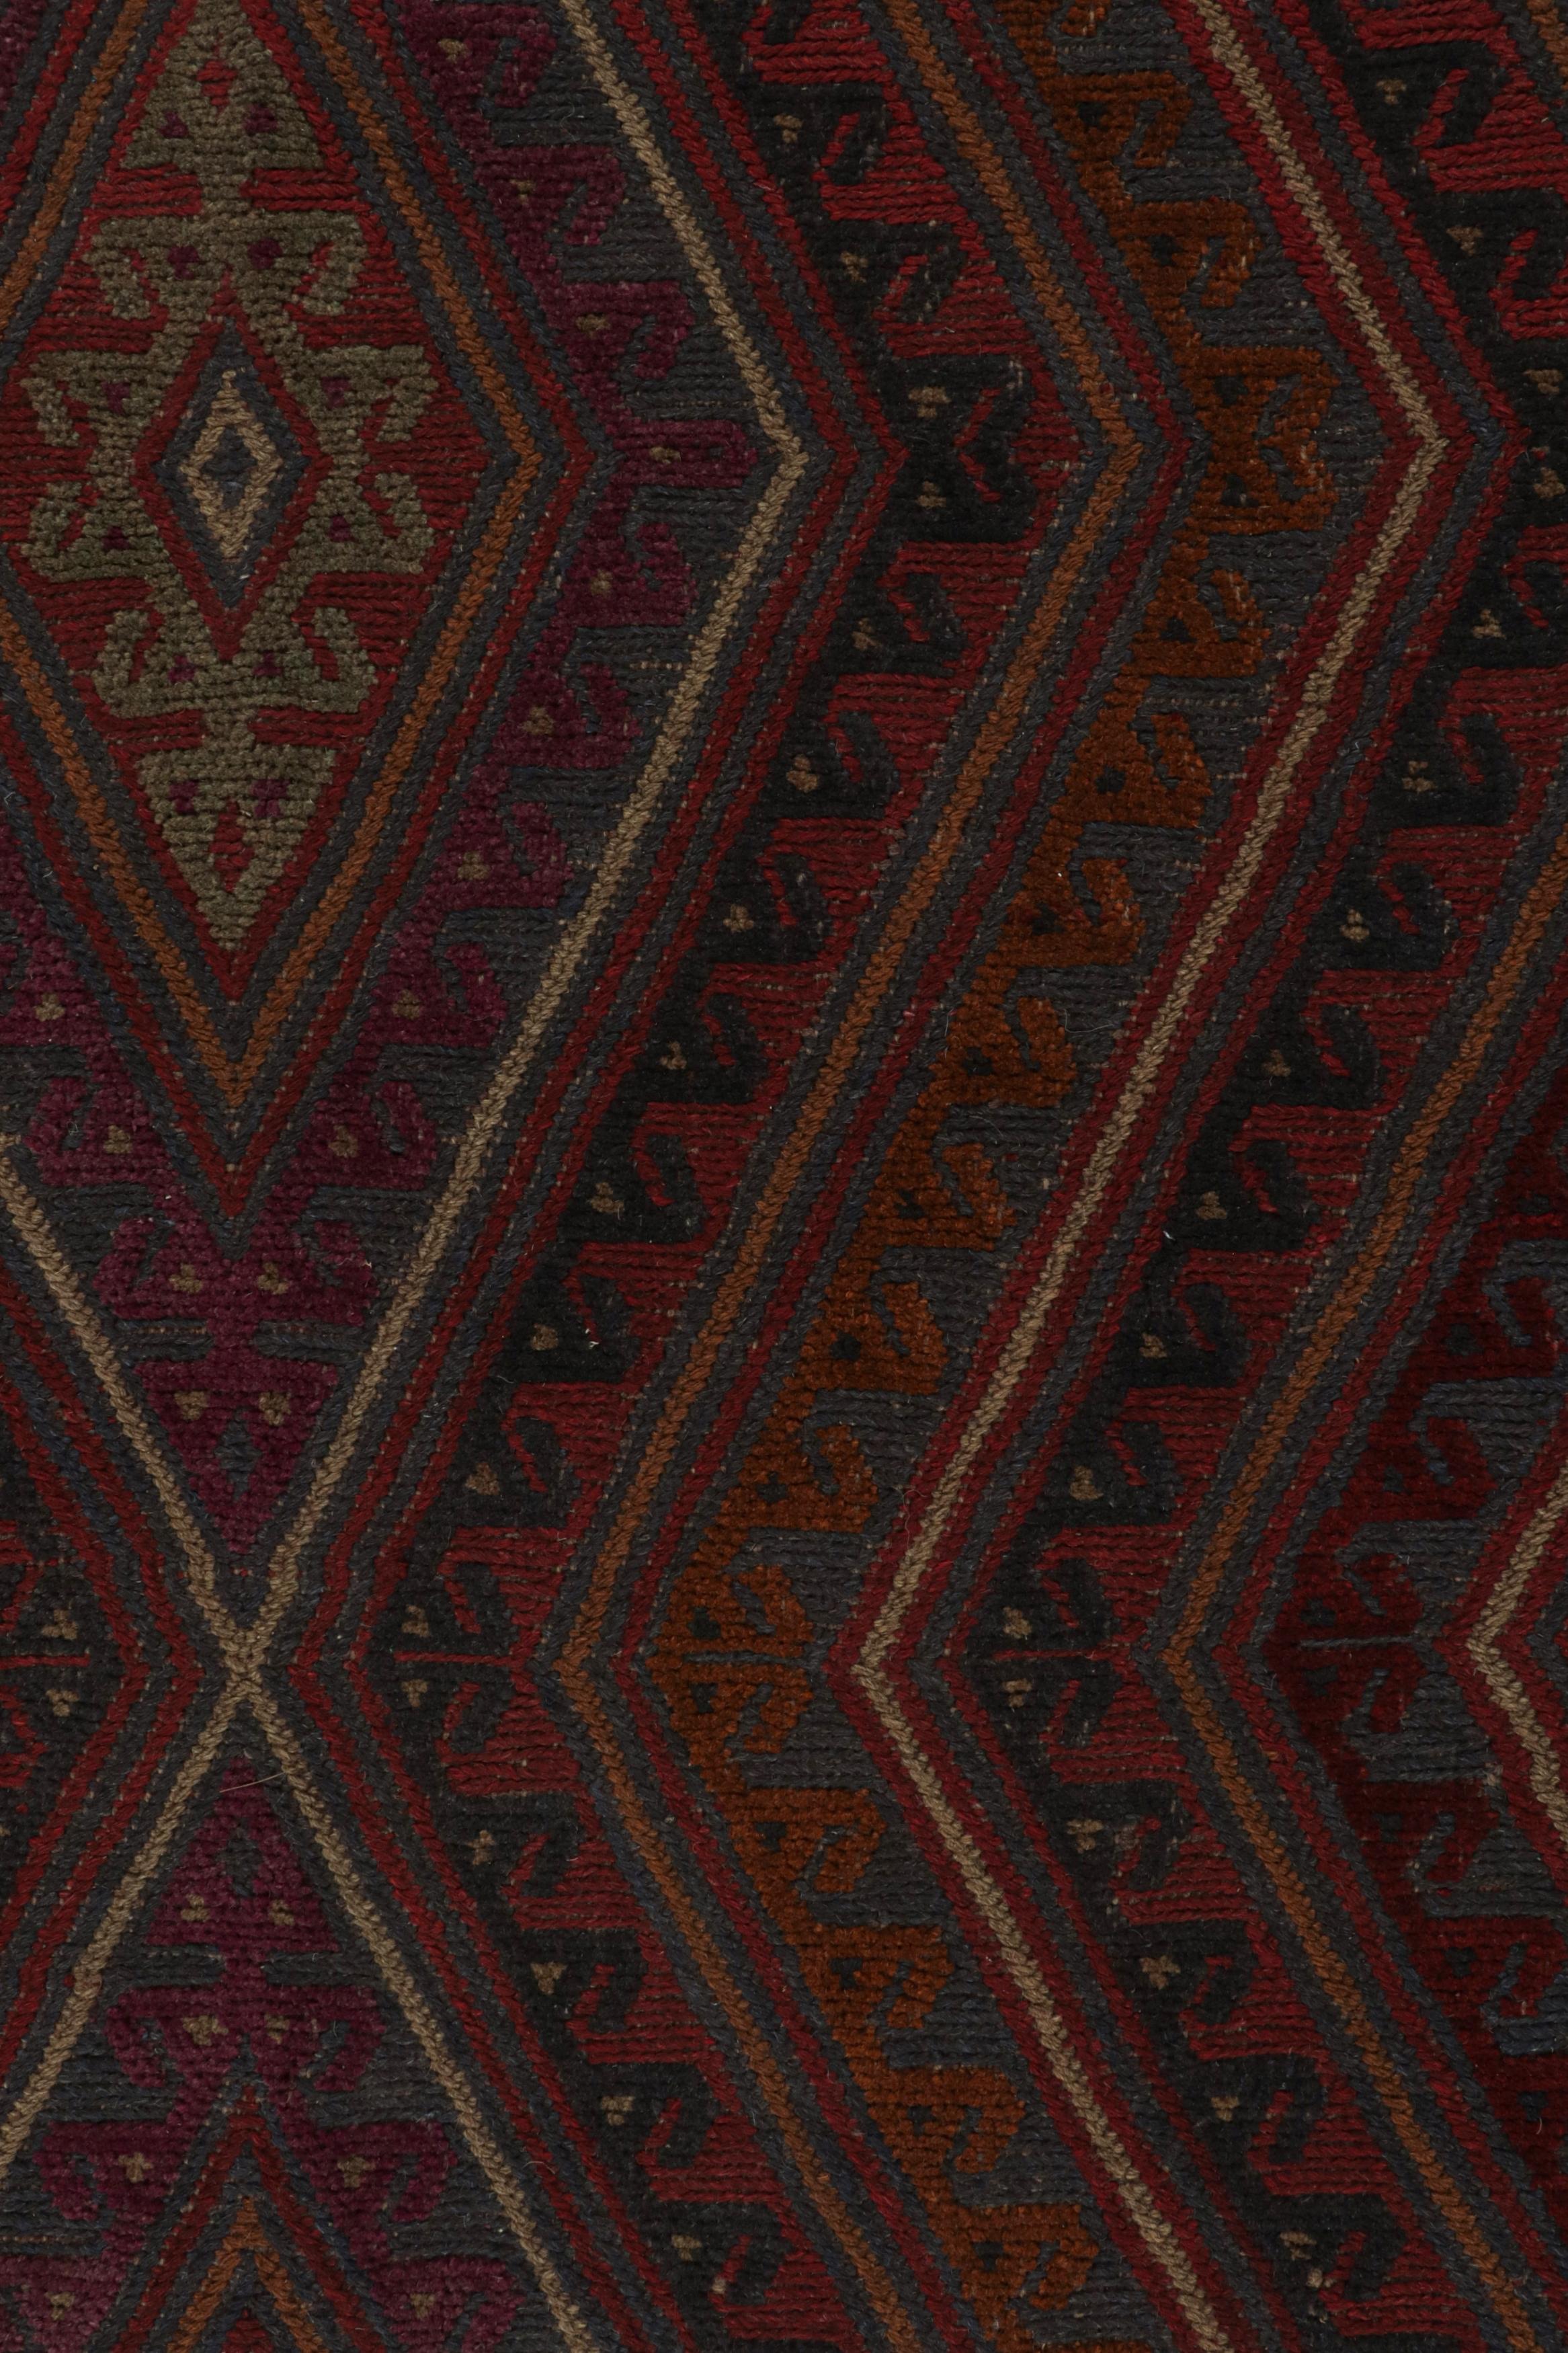 Contemporary Rug & Kilim’s Mashwani Afghan Baluch Rug in Red, Rust & Blue Geometric Patterns  For Sale